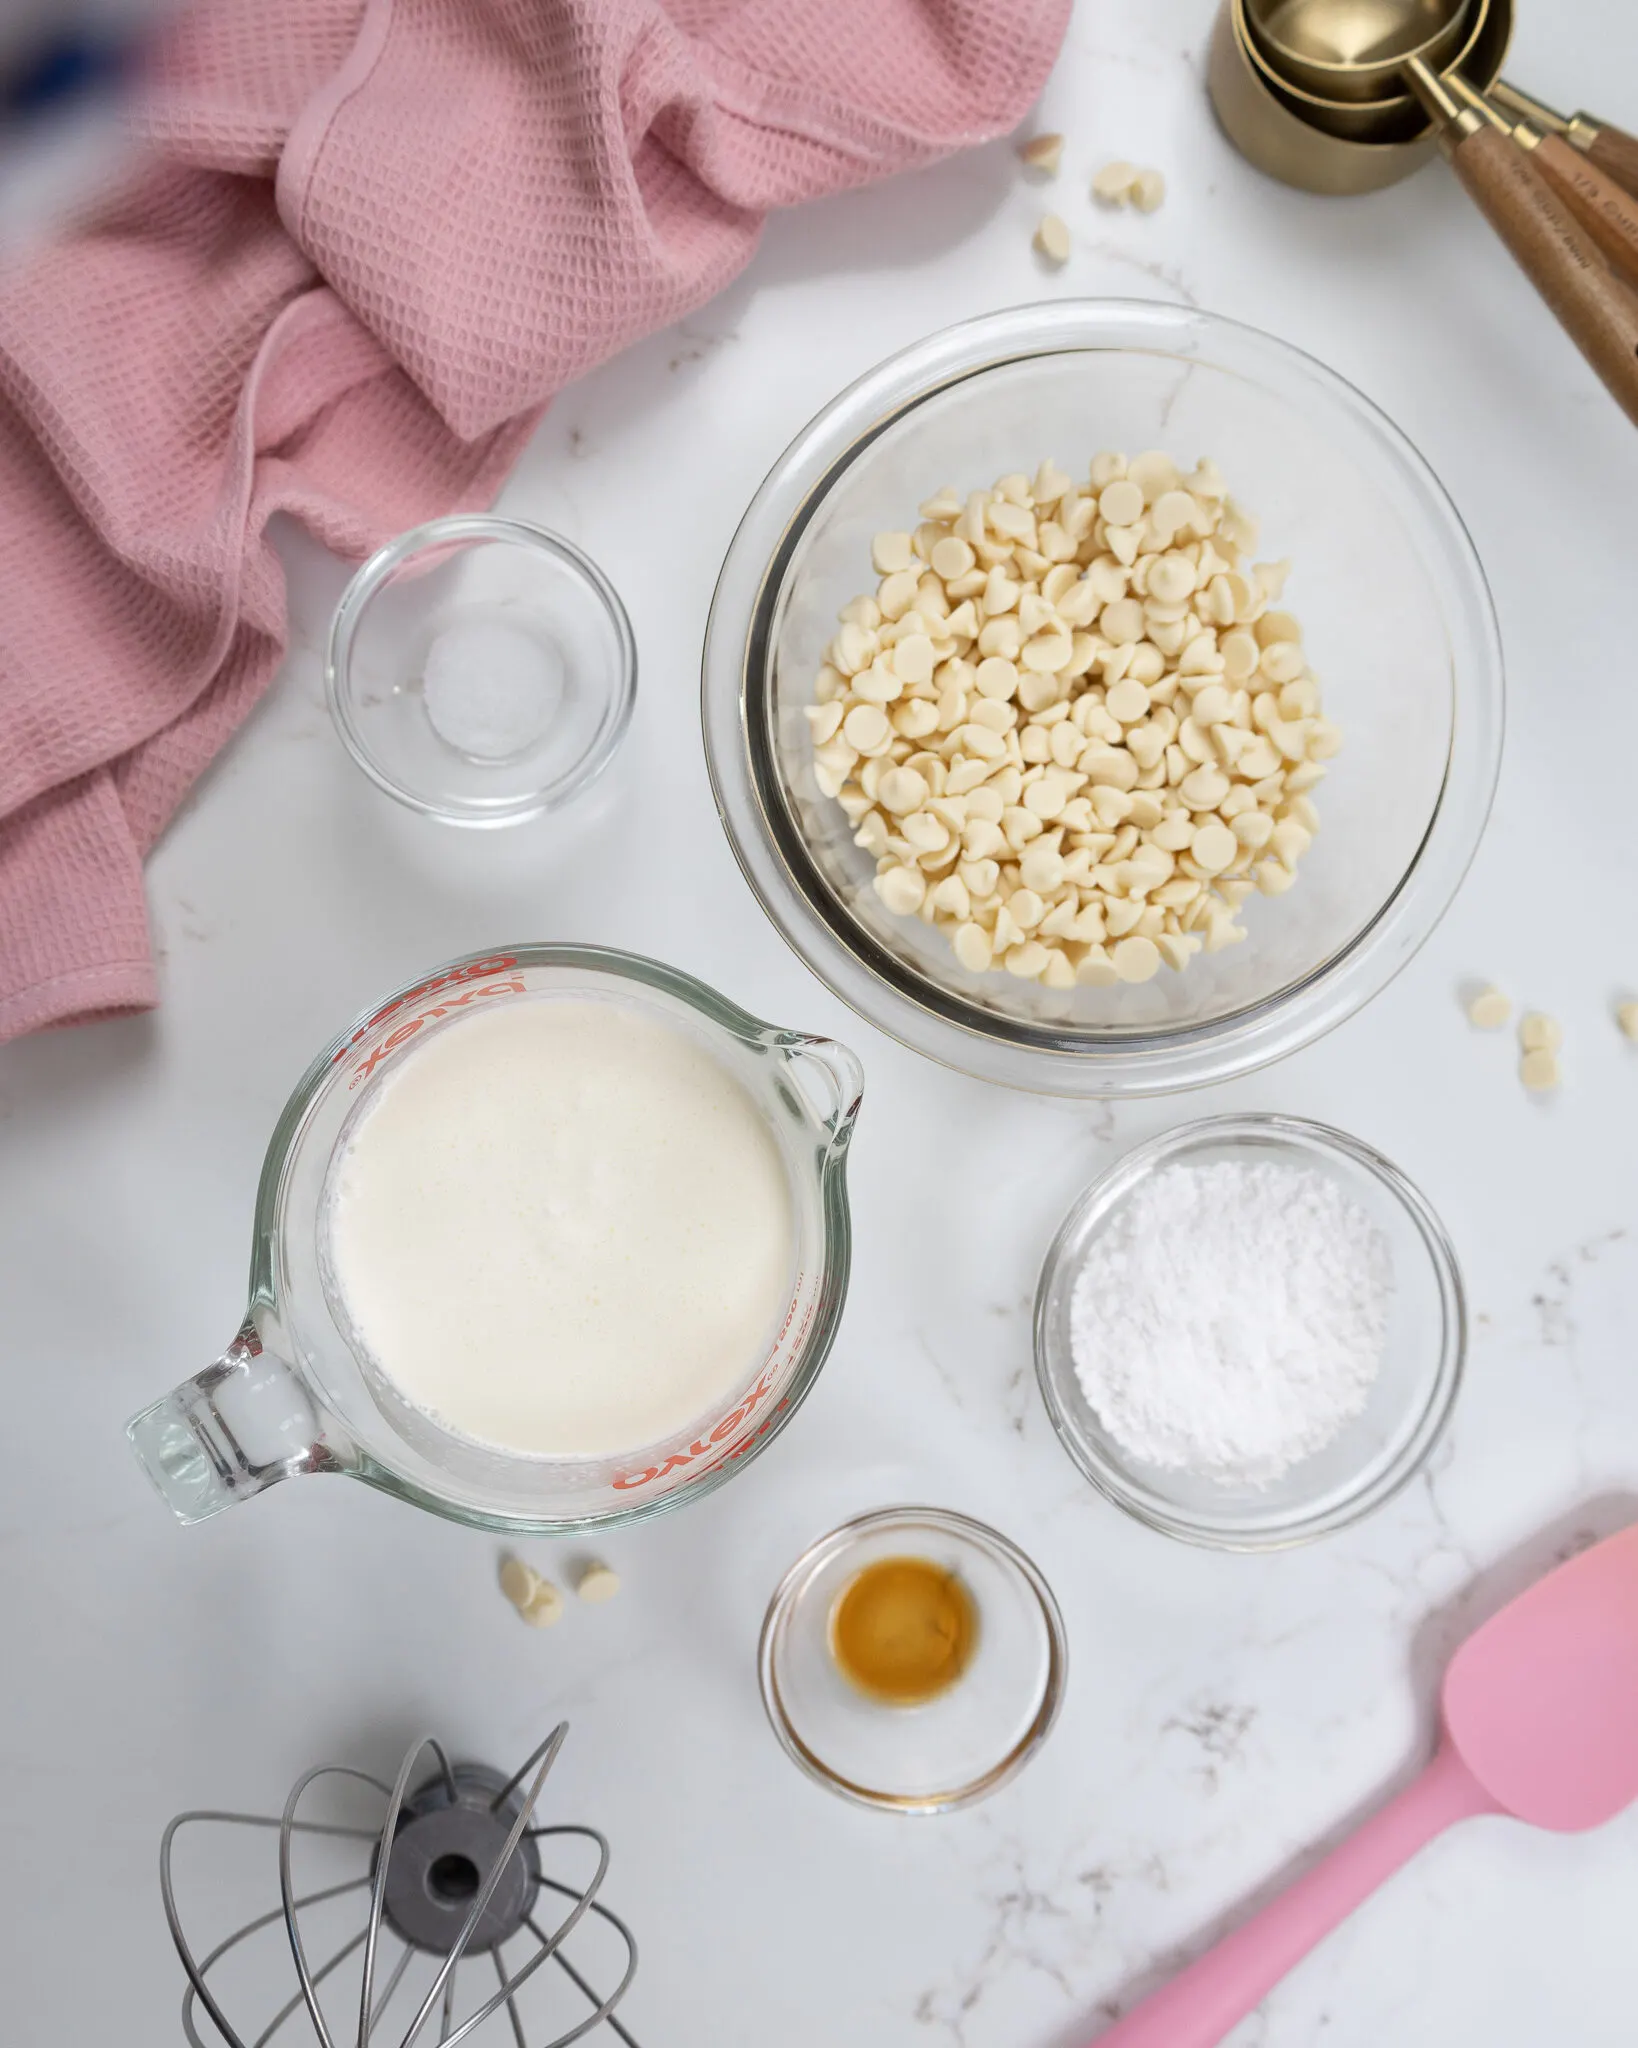 image of ingredients laid out to make a white chocolate hazelnut mousse cake filling